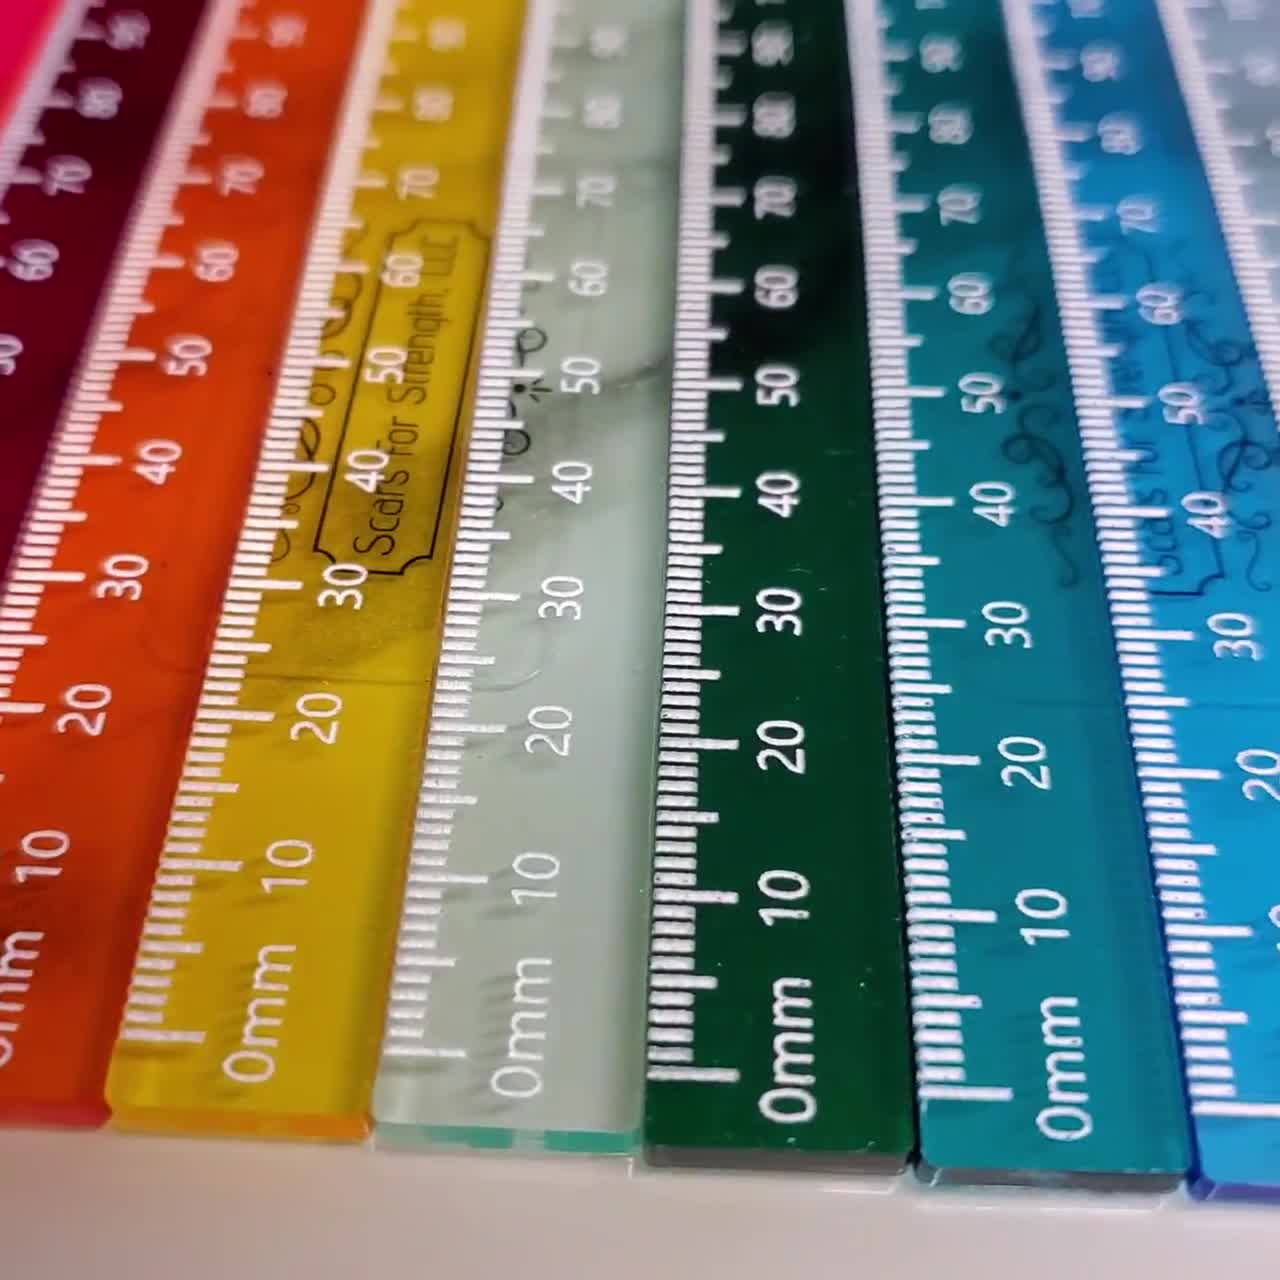 Nothing new was purchased to make this ruler 📏 To use it, I stick